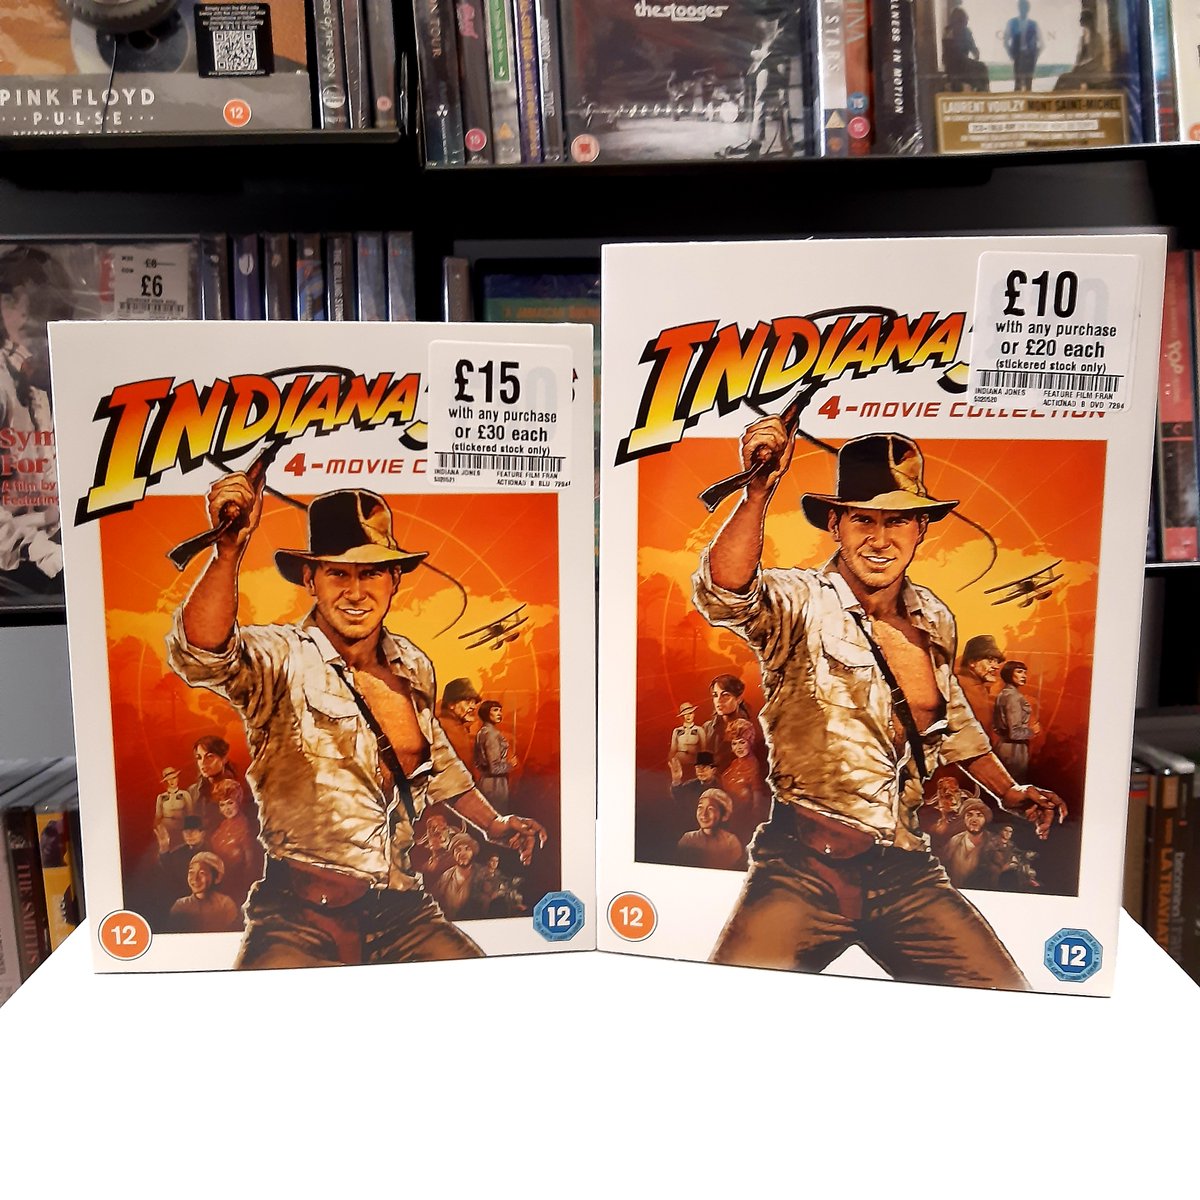 We have the Indiana Jones 4-movie collection in stock as a perfect partner! £10 with any purchase on DVD and £15 with any purchase on Blu-ray!

#gettofopp and grab a bargain!